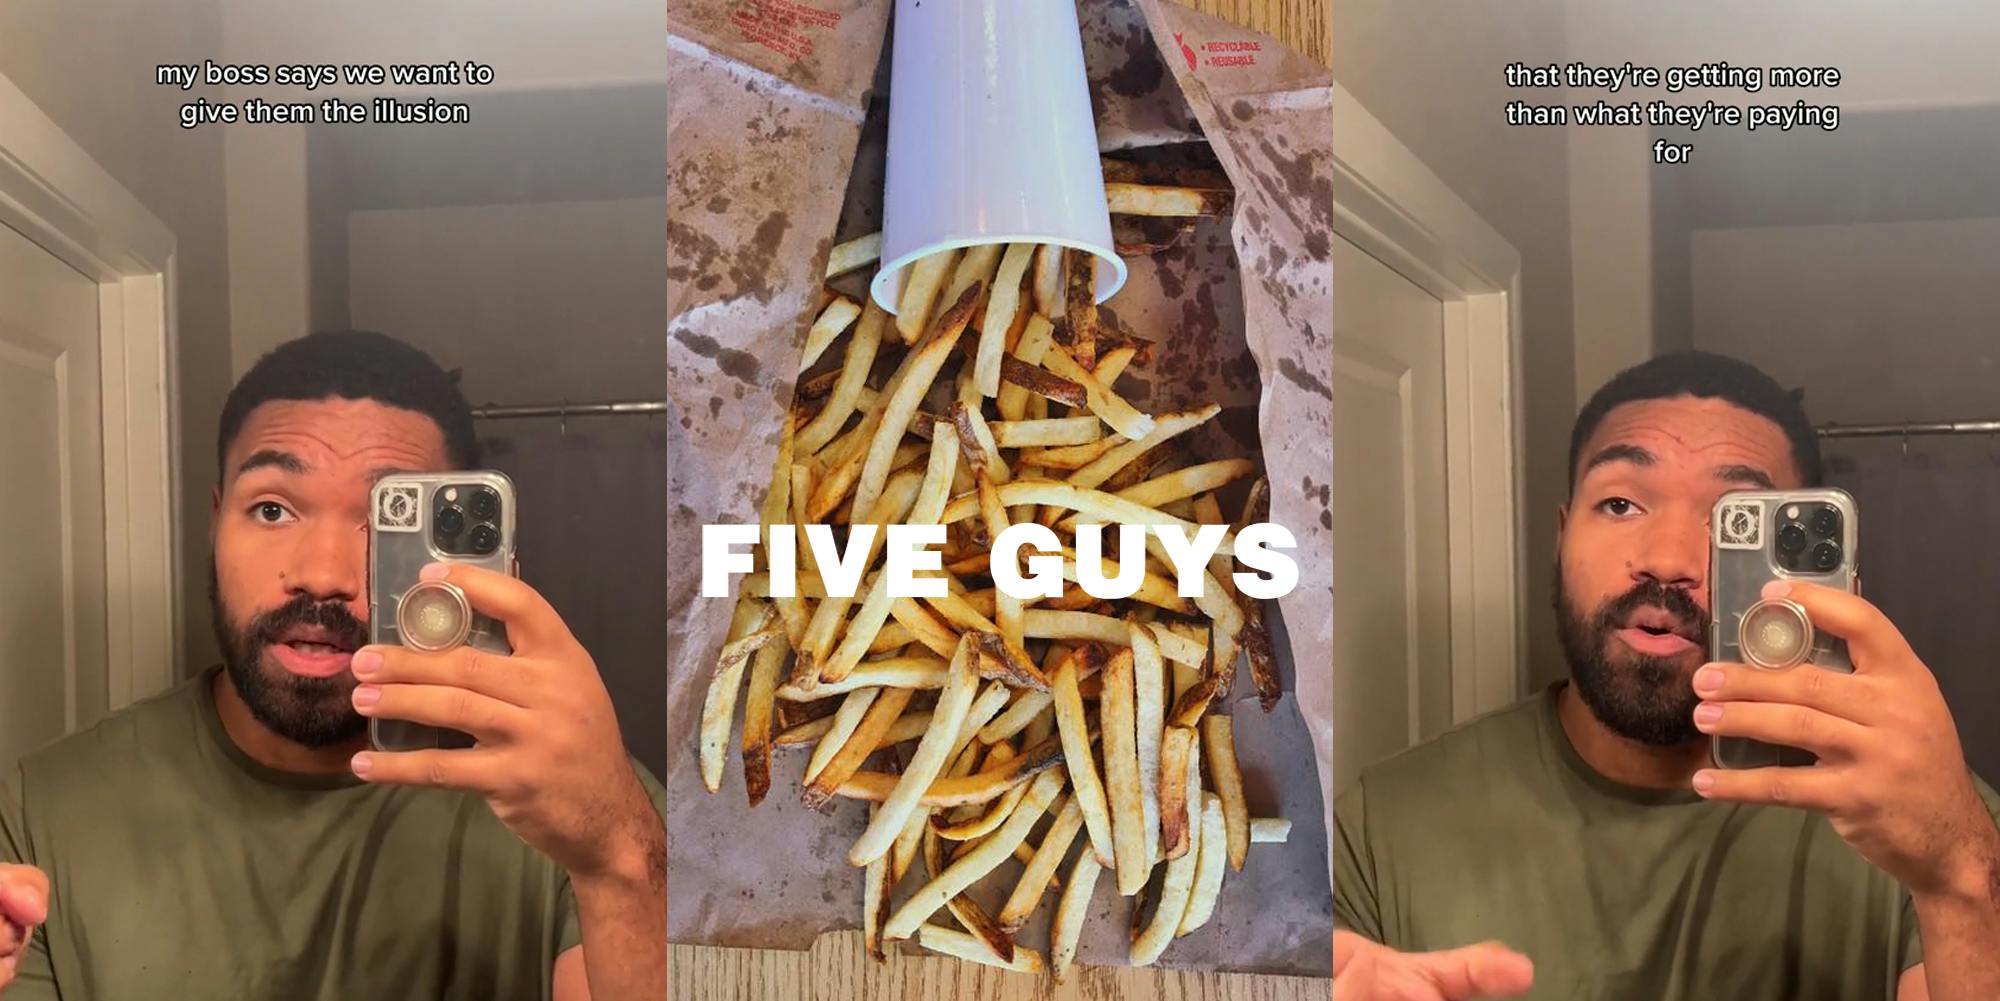 former Five Guys employee speaking with caption 'my boss says we want to give the illusion' (l) Five Guys fries on paper spilling from cup on table with Five Guys logo (c) former Five Guys employee speaking with caption 'that they're getting more than what they paid for' (r)